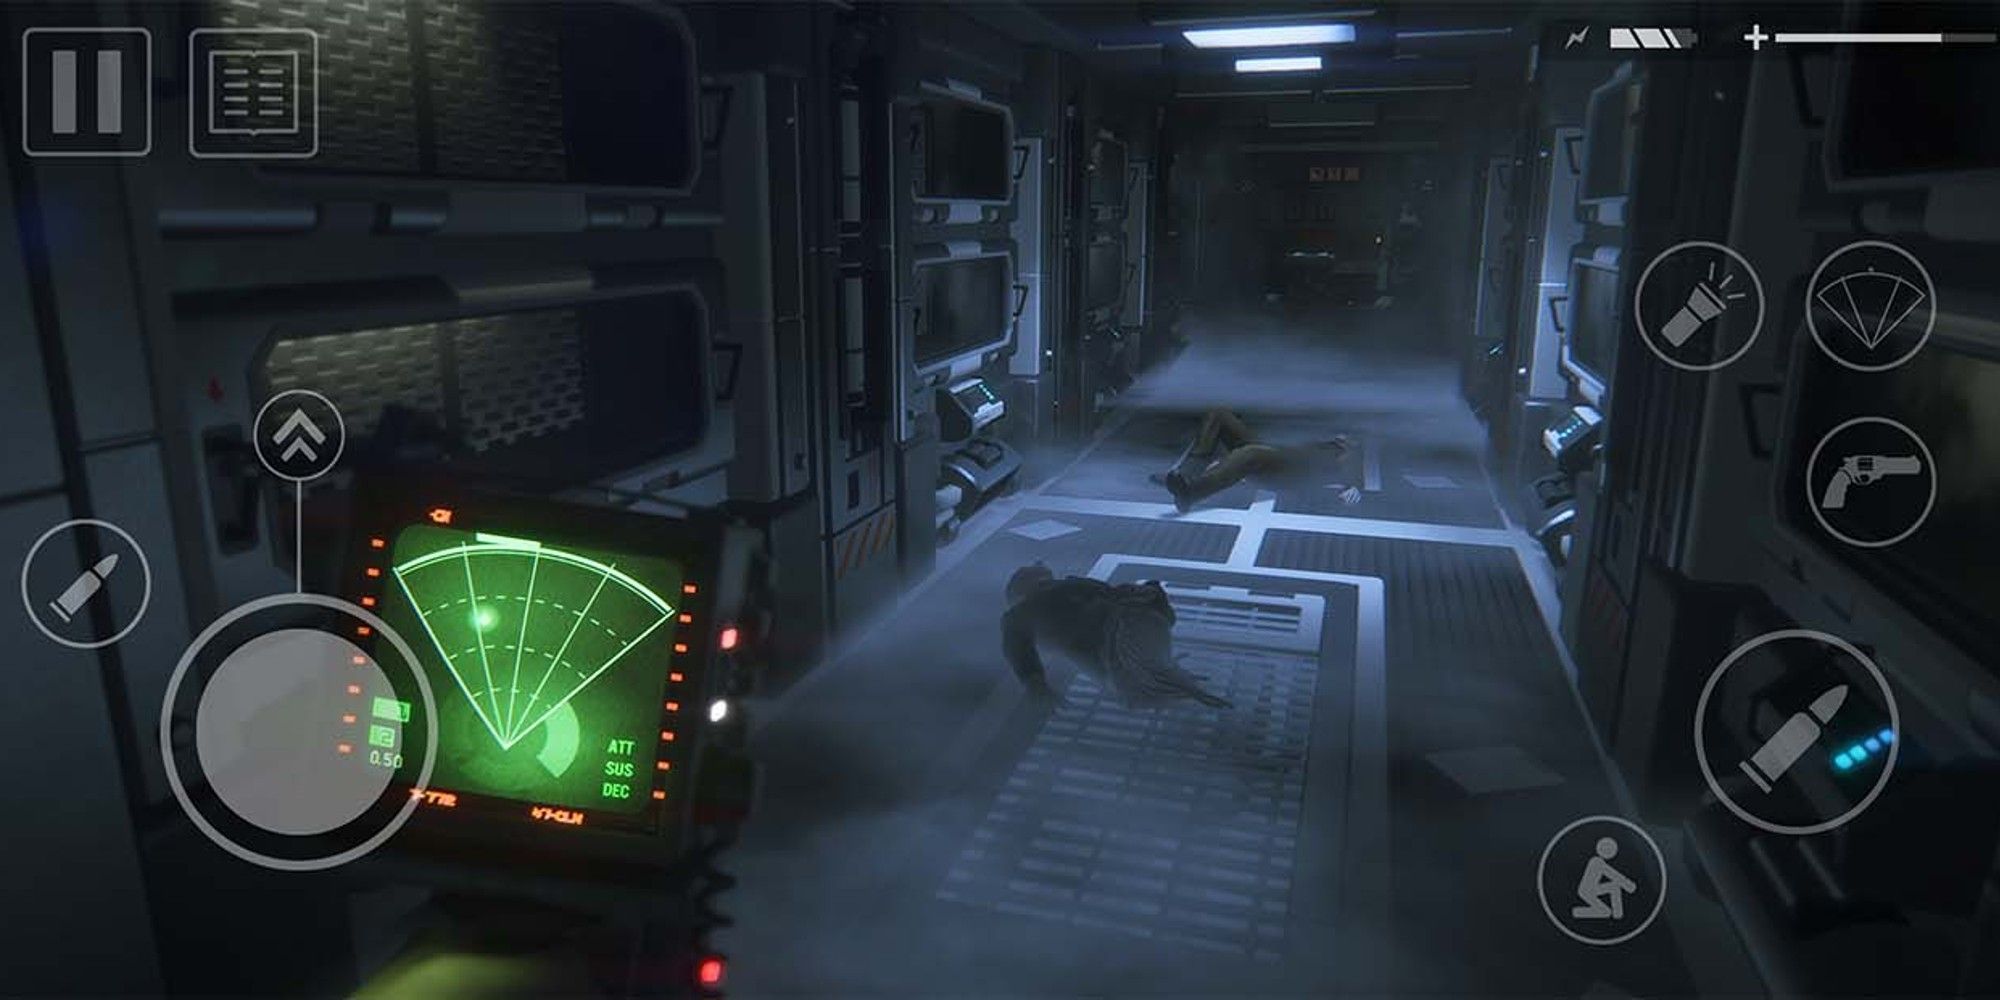 Alien Isolation on Mobile - player showing device and gameplay with dead bodies down corridor